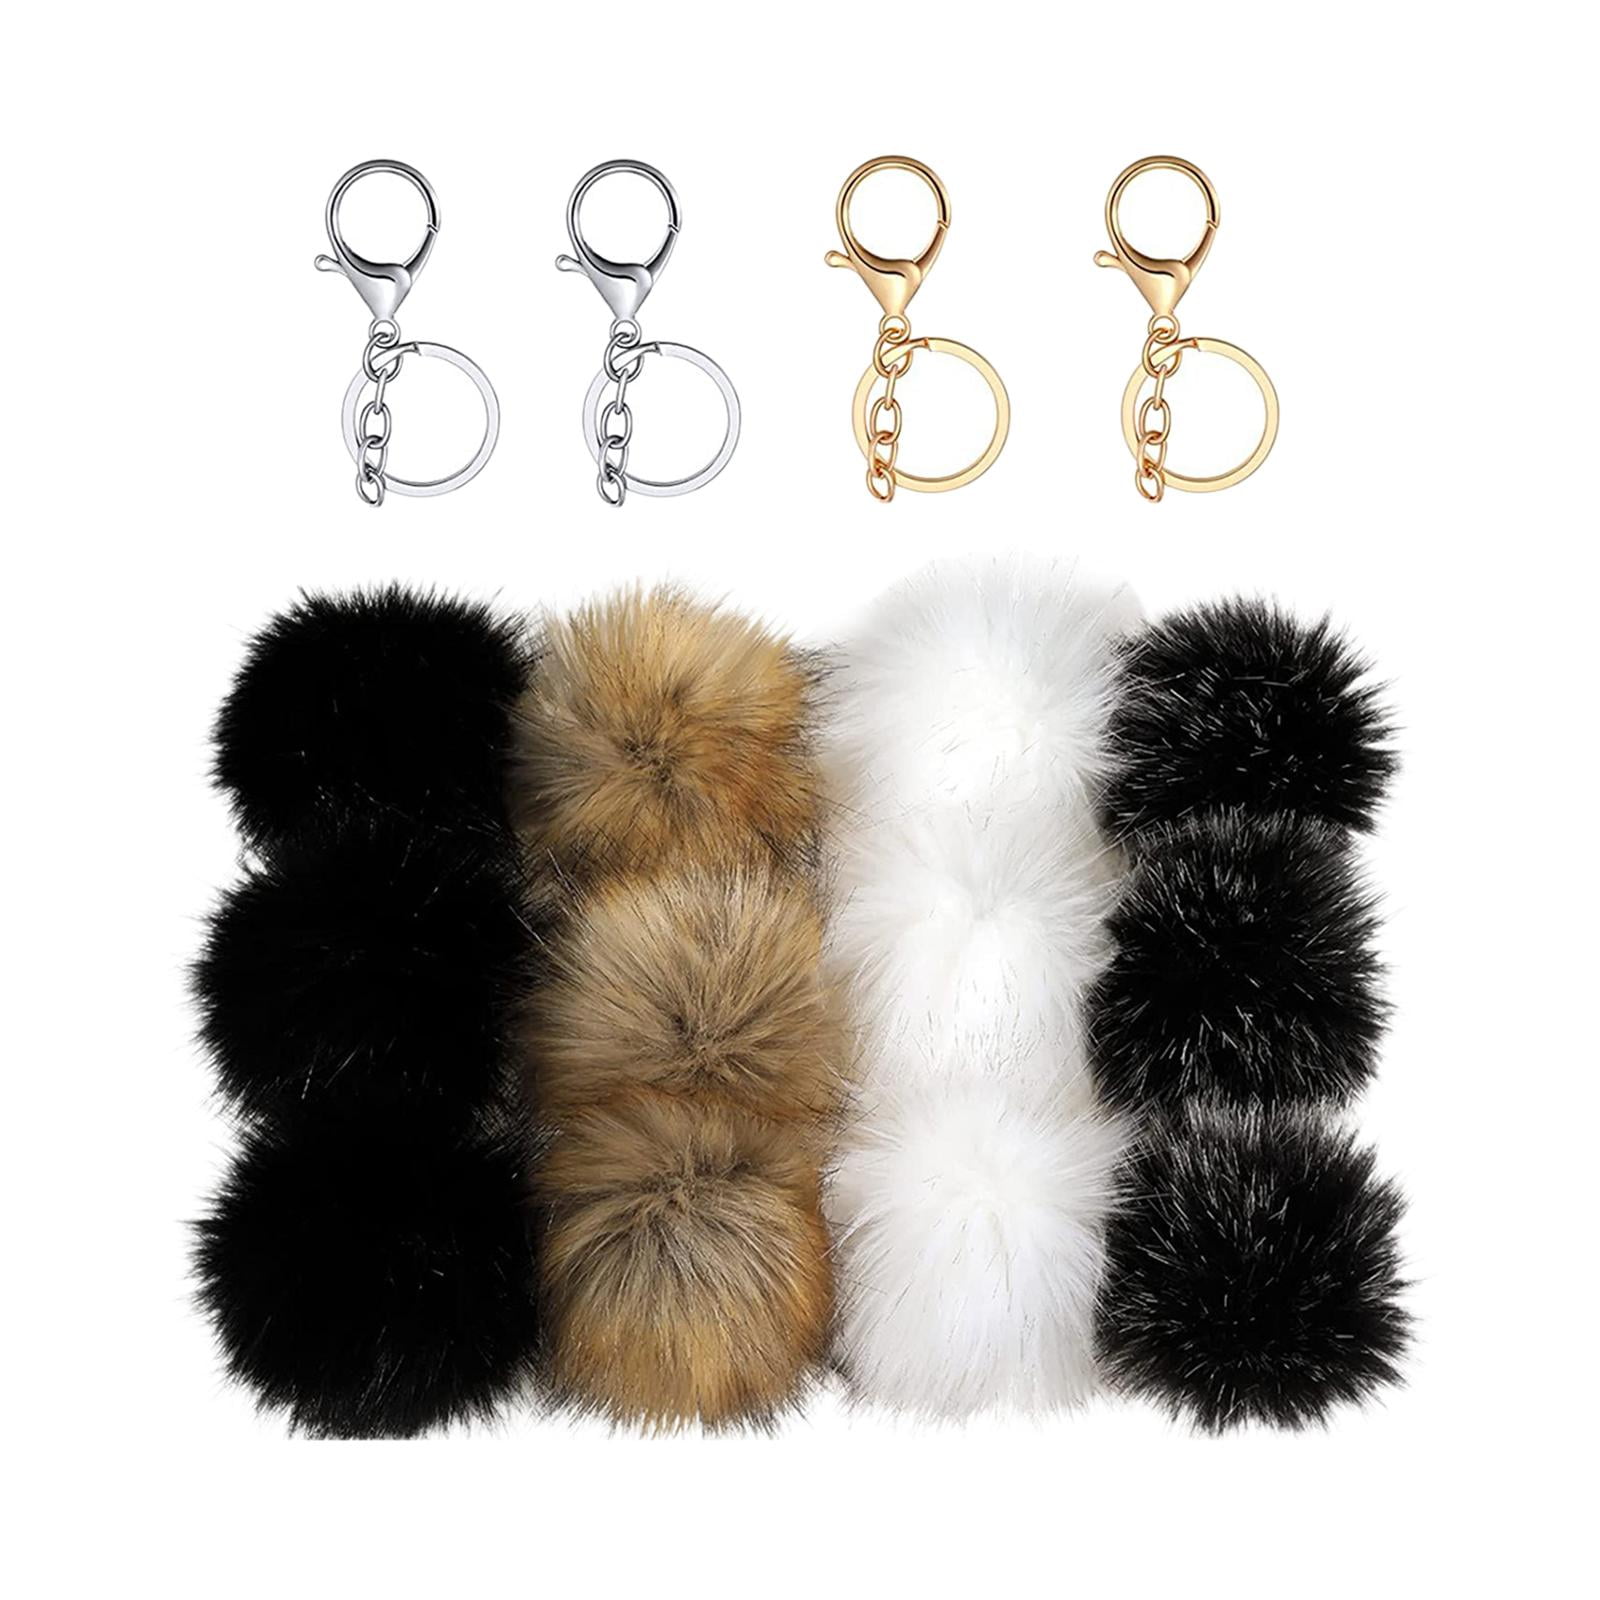 Faux Fox Fur Fluffy Pom Pom Balls with Elastic Loop DIY Faux Fur Pompoms for Hats Keychains Shoes Scarves Bags Charms Black 